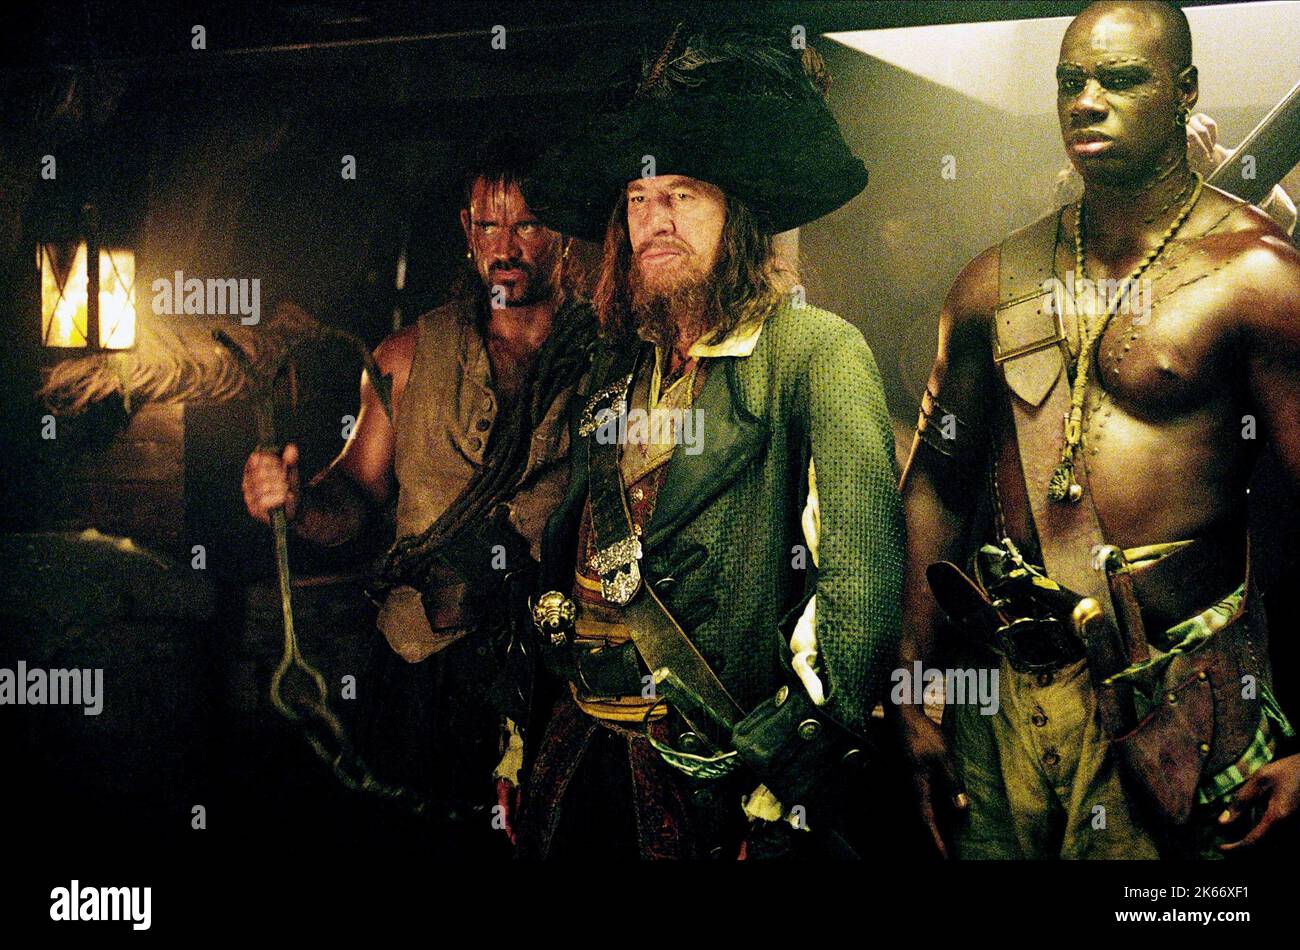 GODDARD,RUSH,JR., PIRATES OF THE CARIBBEAN: THE CURSE OF THE BLACK PEARL, 2003 Stock Photo